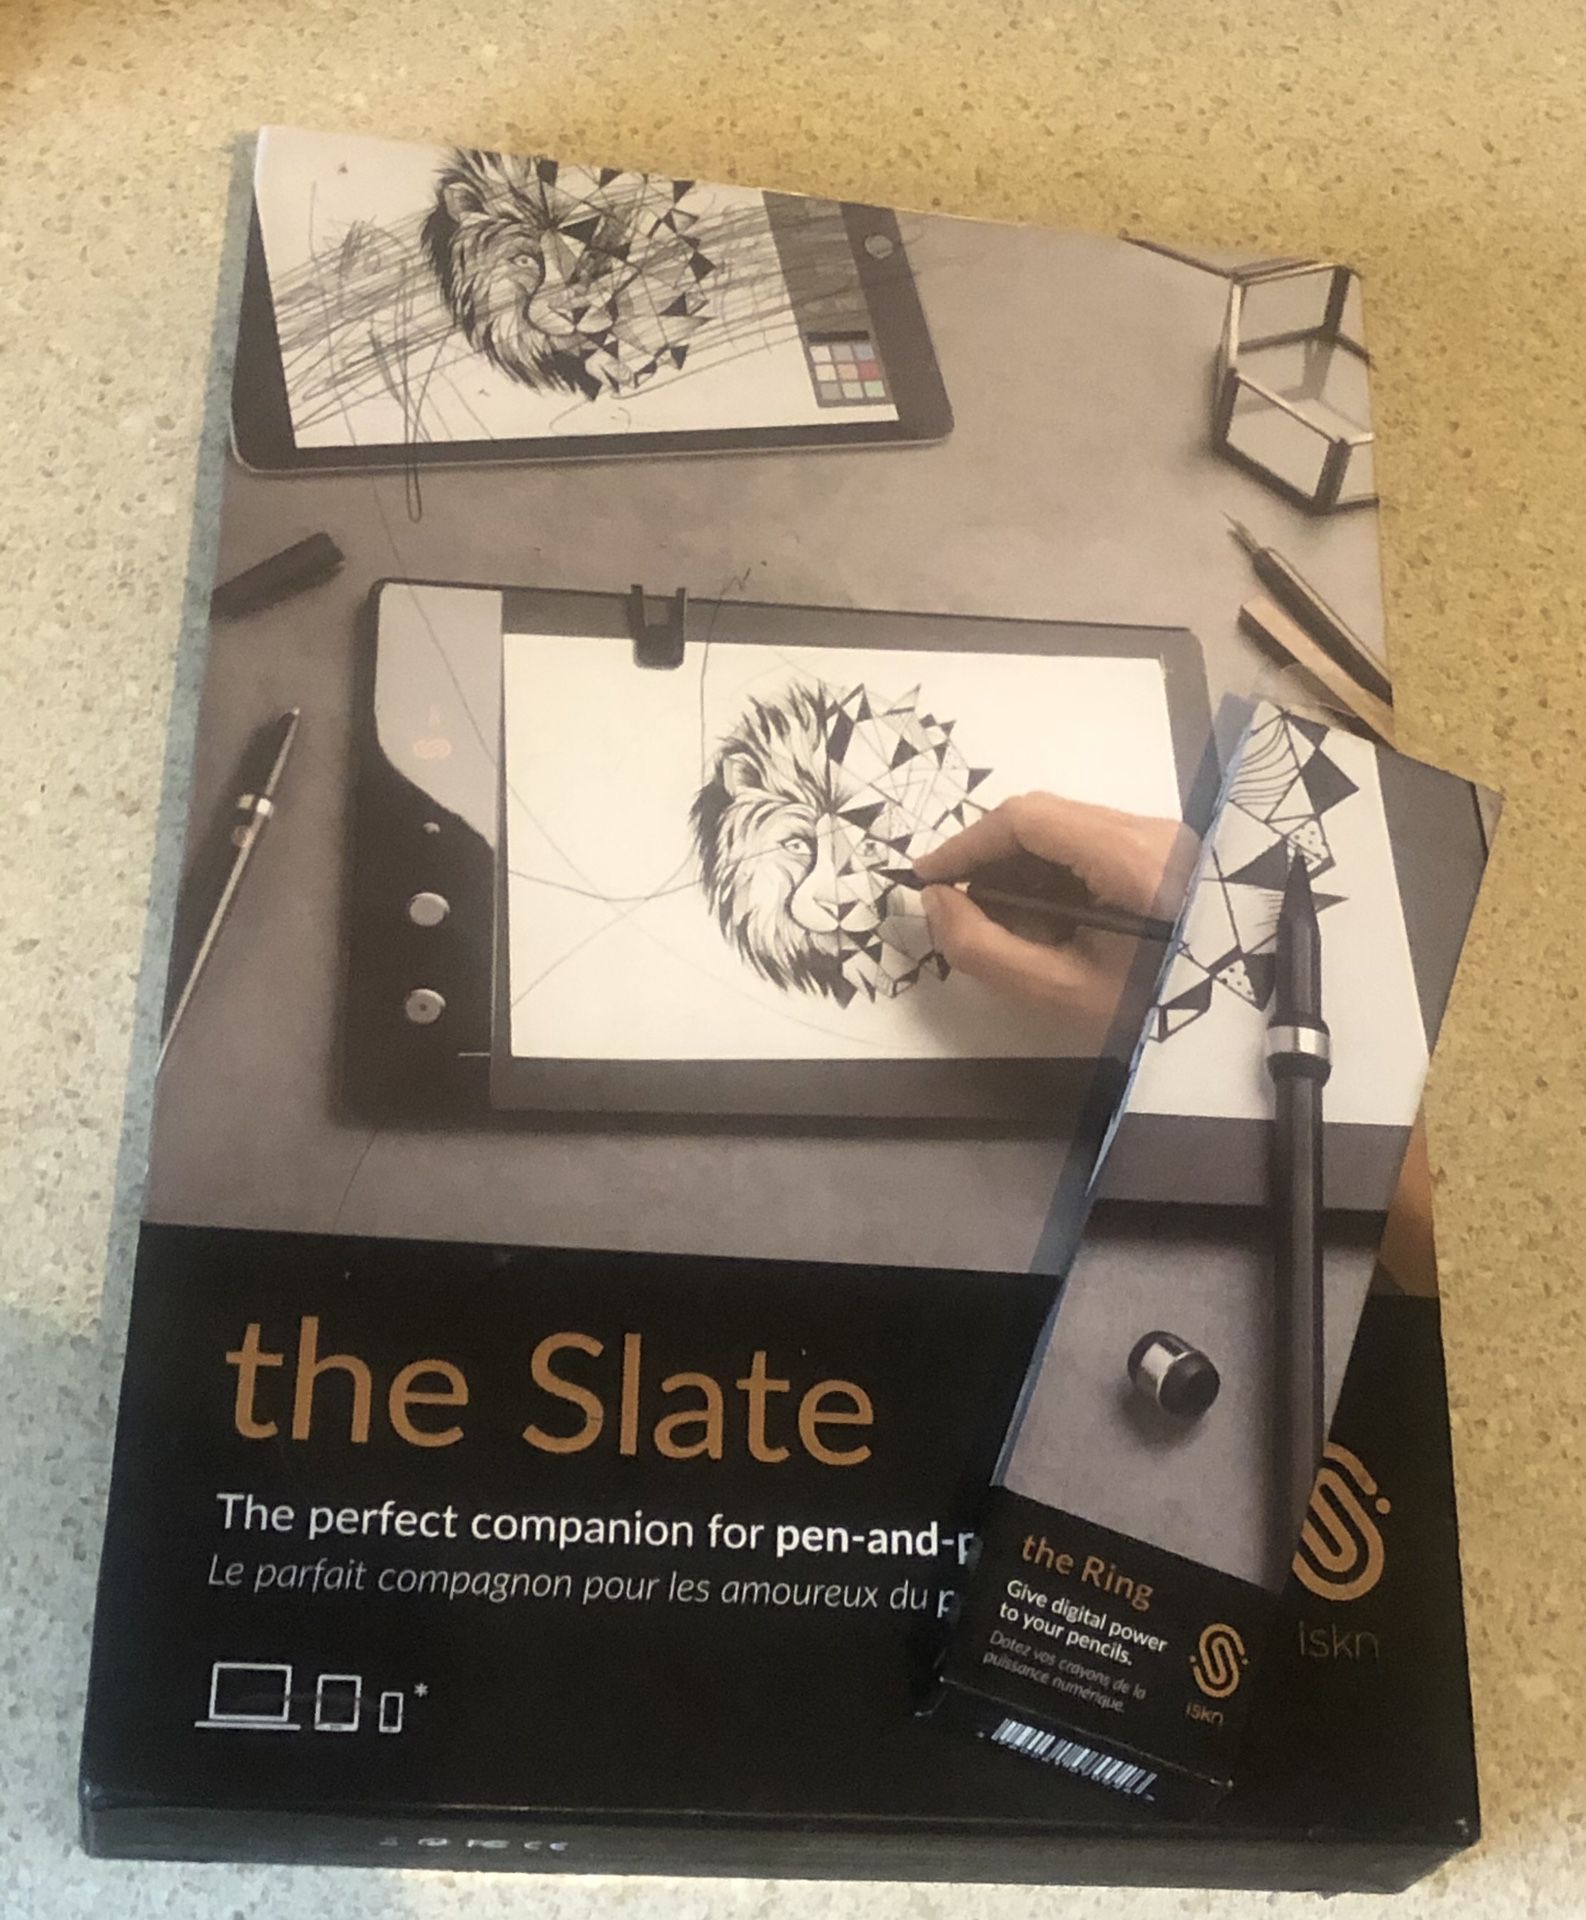 Drawing Pad / iSkn / the Slate